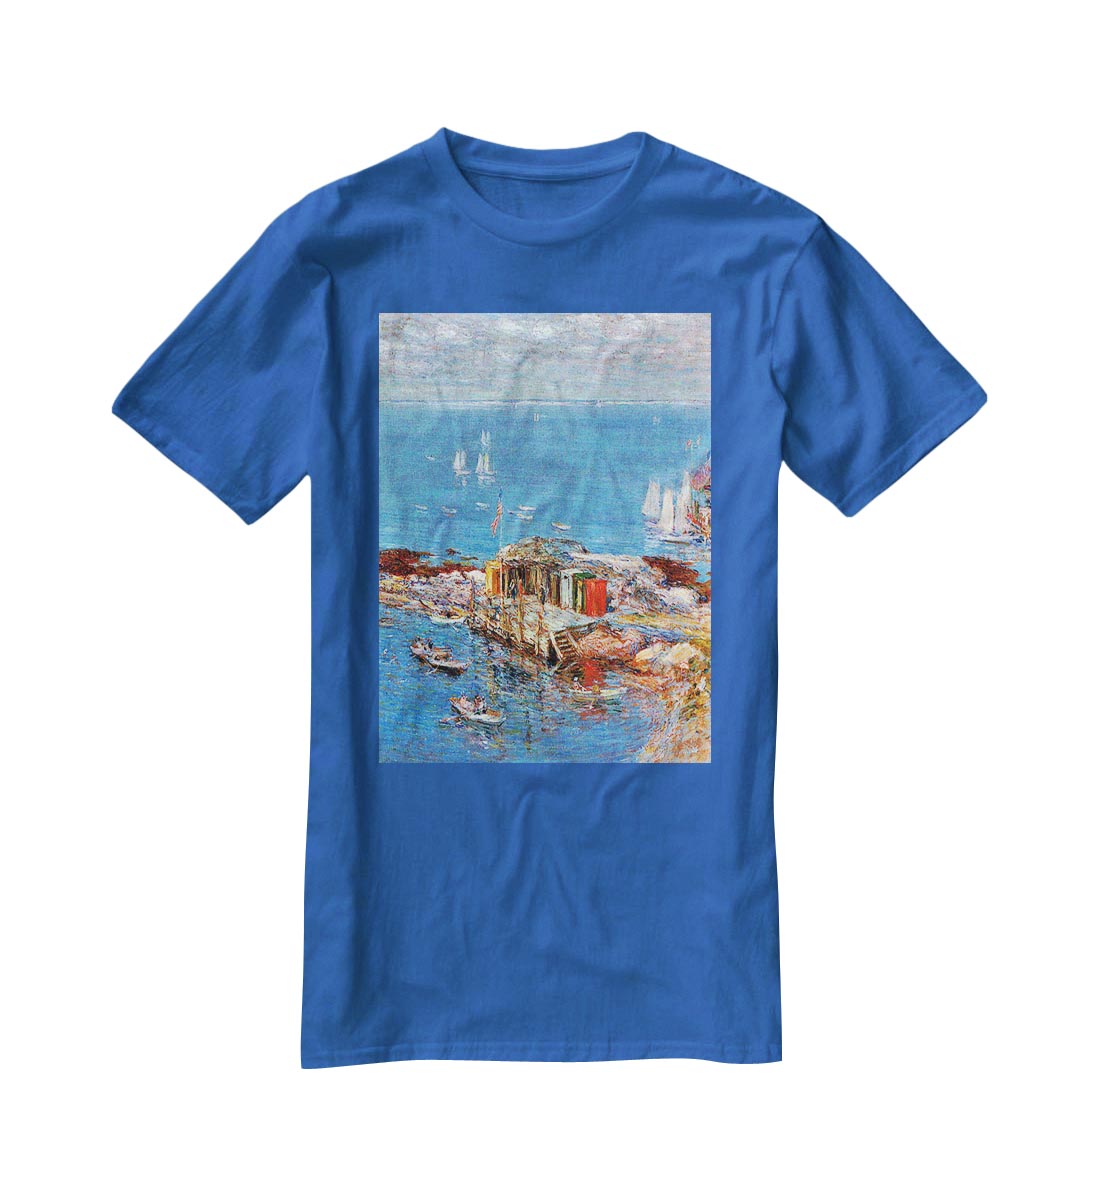 Afternoon in August Appledore by Hassam T-Shirt - Canvas Art Rocks - 2